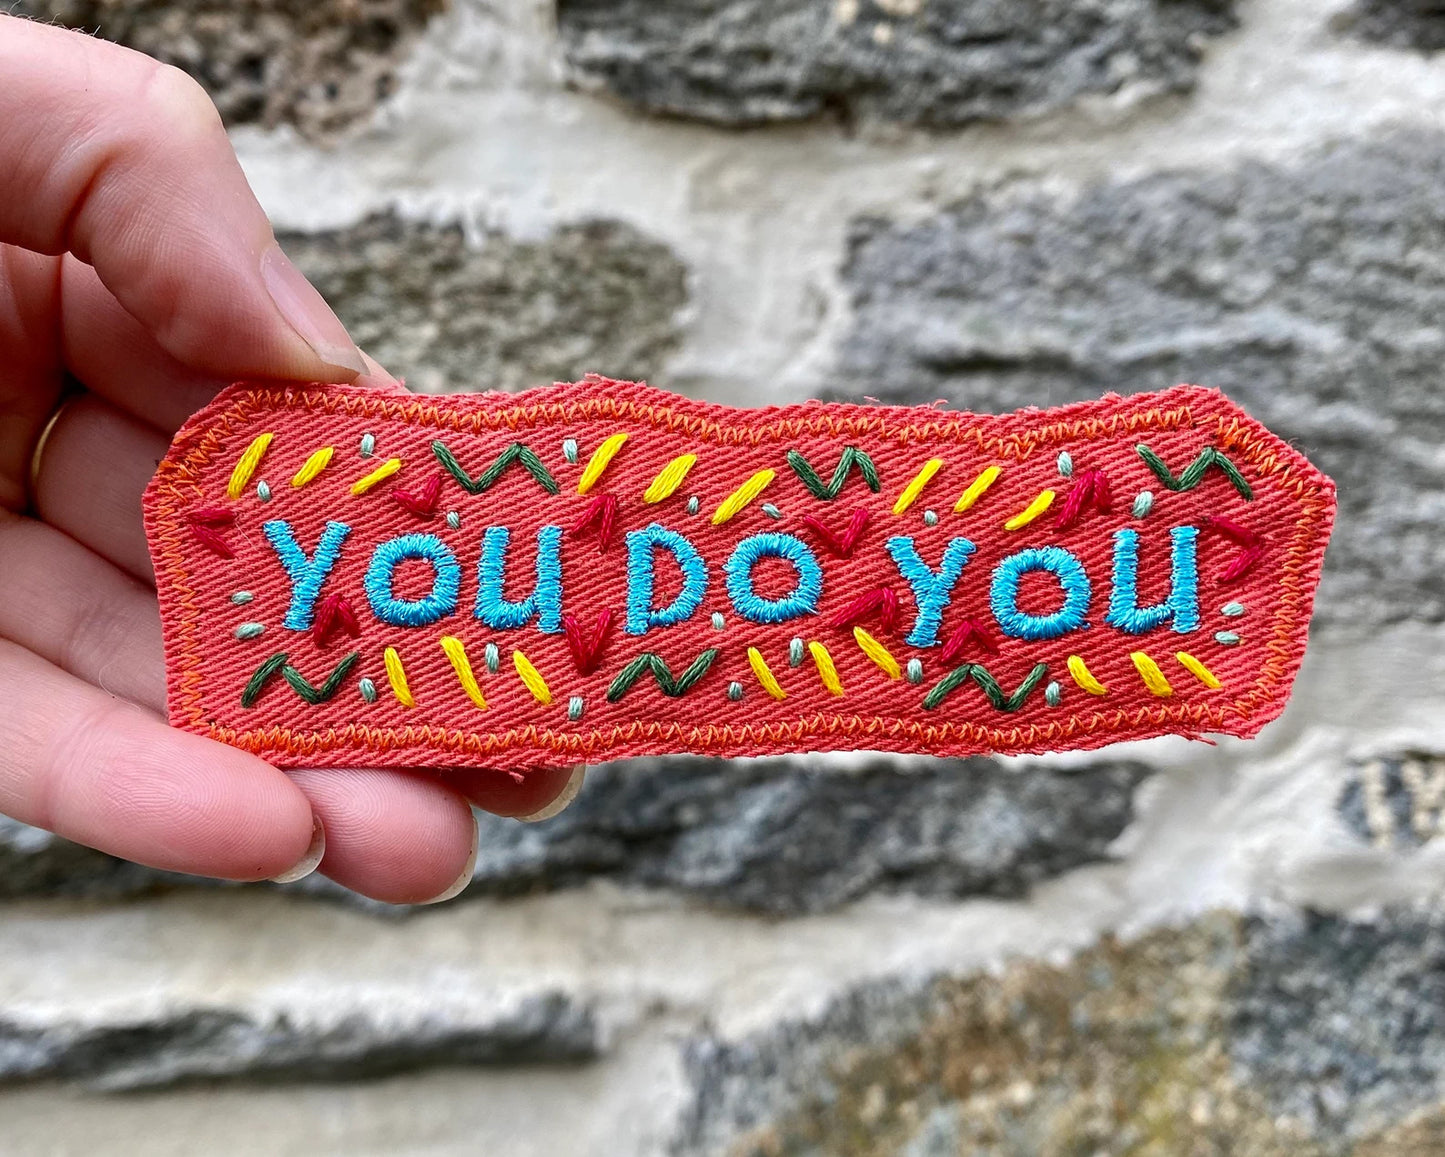 You Do You. Handmade Embroidered Canvas Patch.